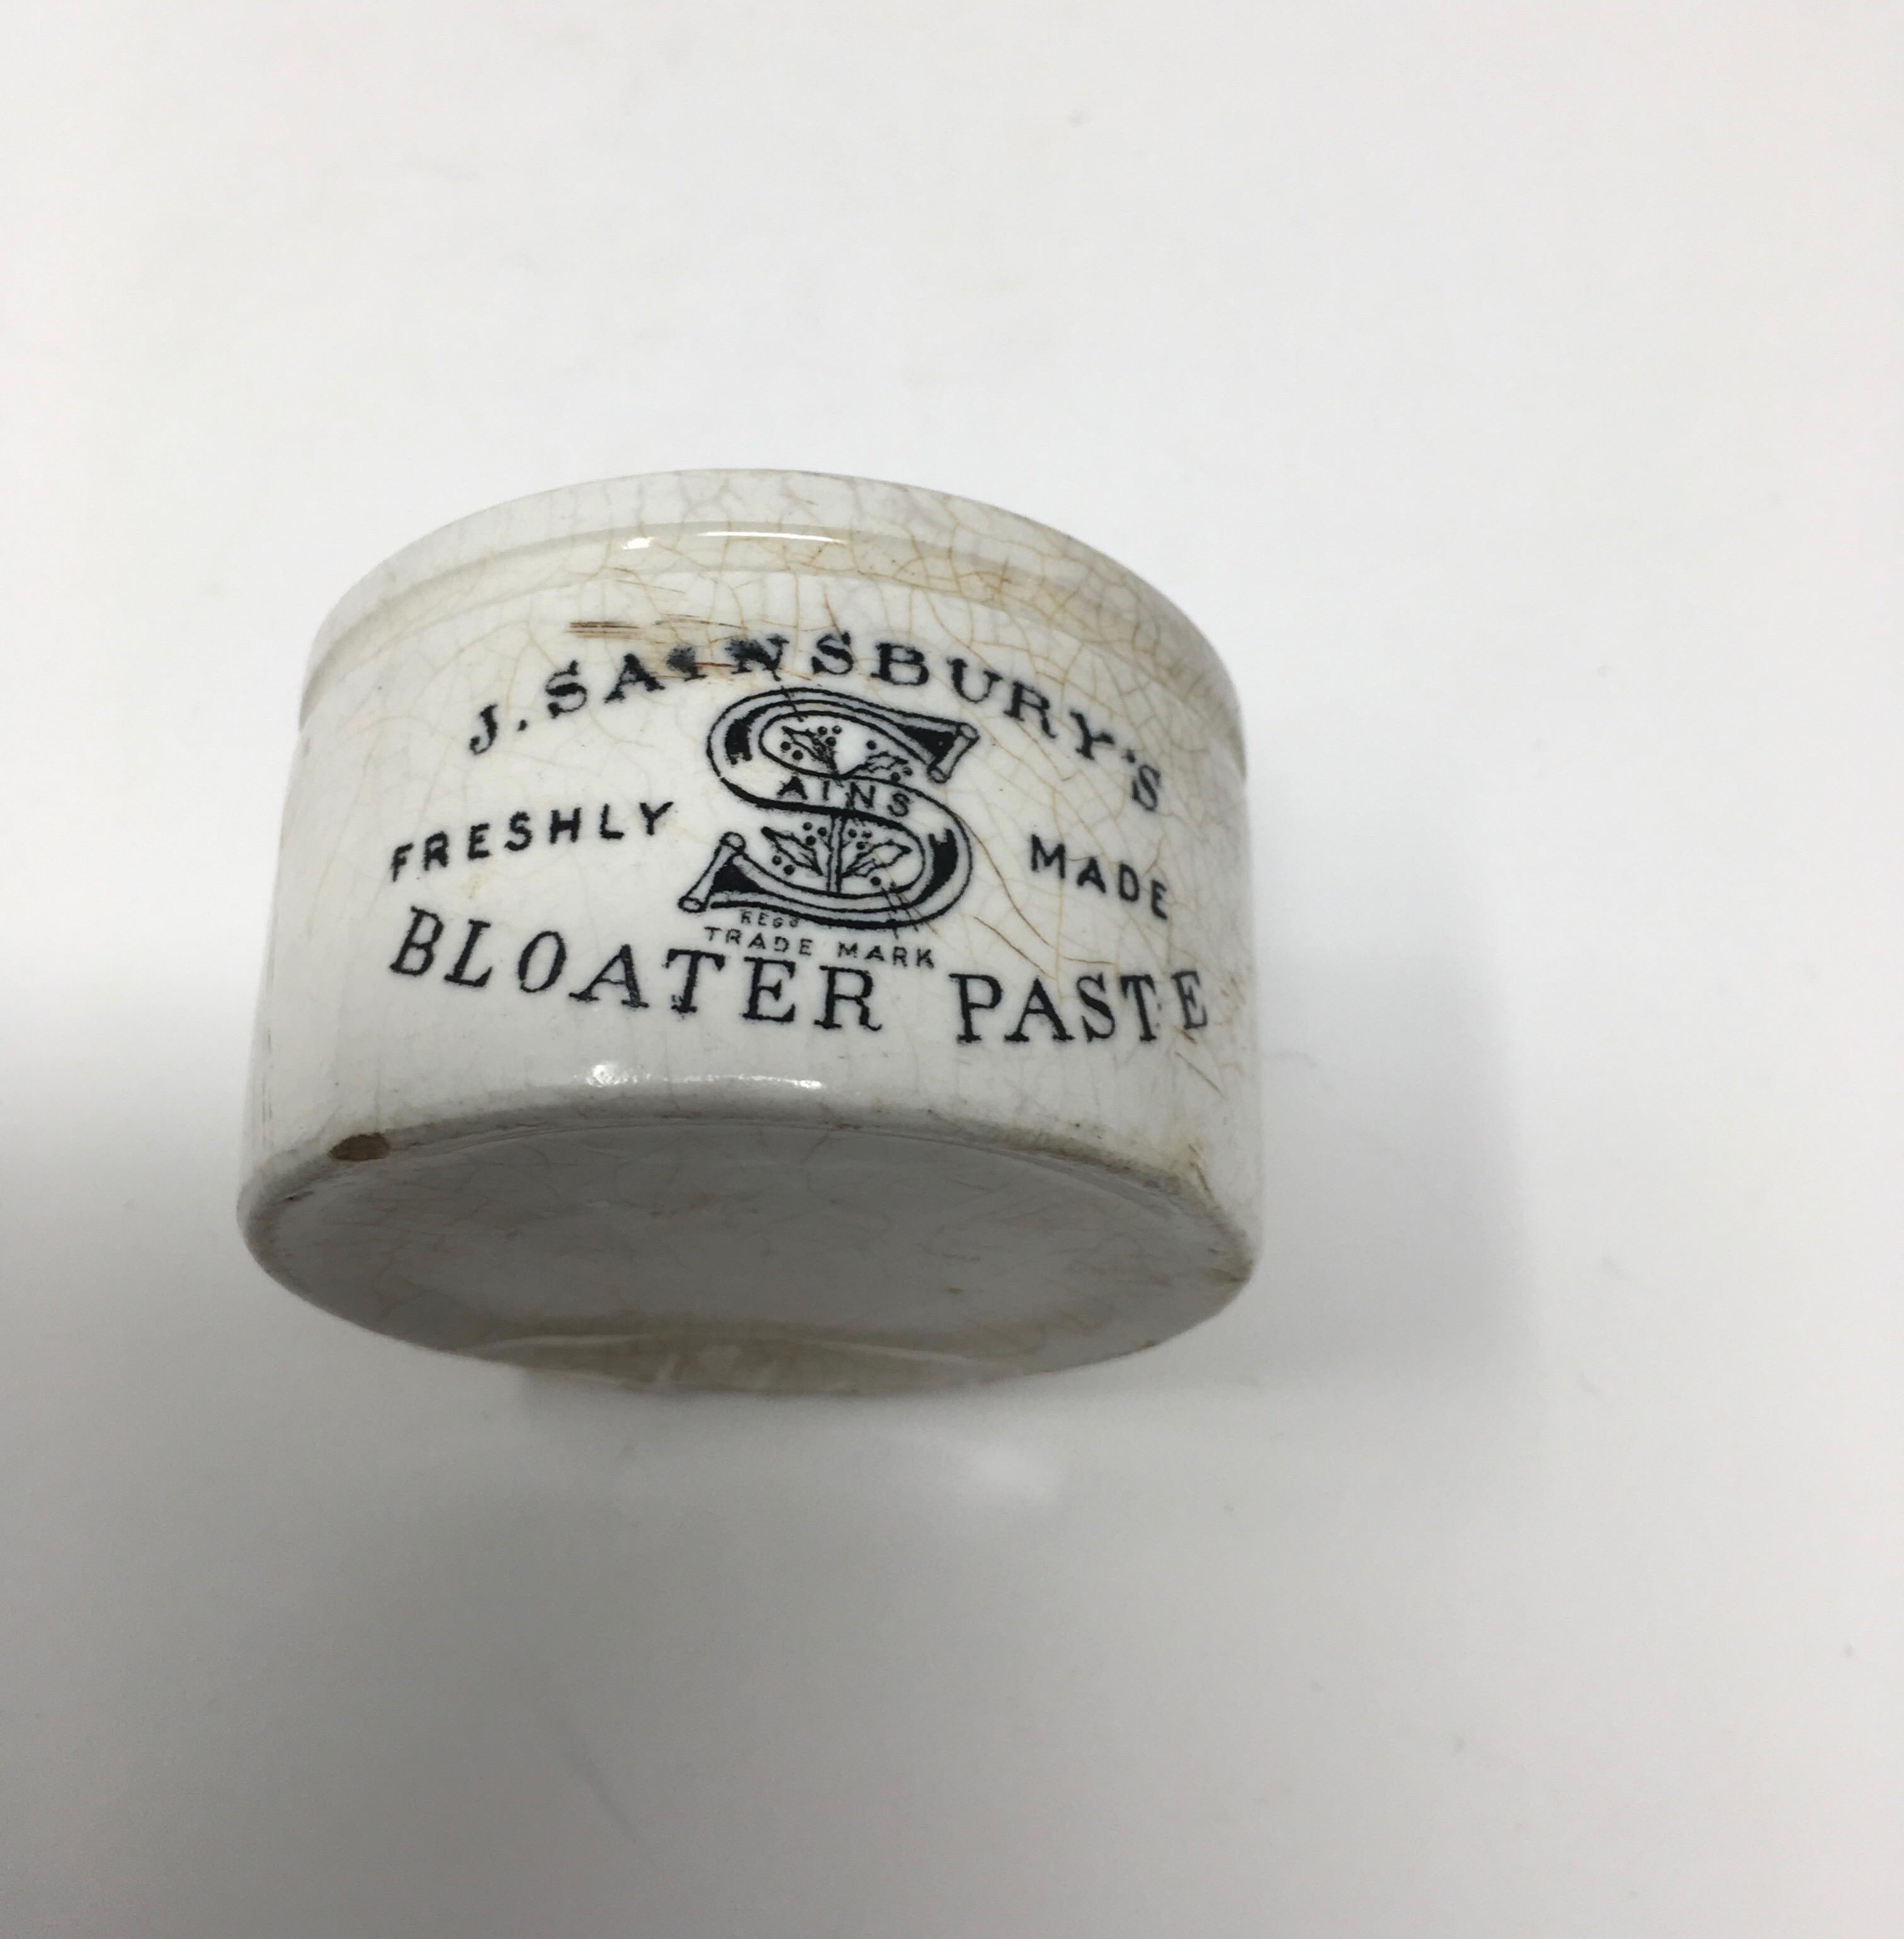 Manufactured in the early 1900s, this ironstone crock was used to sell bloater paste by J. Sainsbury. Bloaters are herring which has been cured by salting and smoking and made into a paste. The 